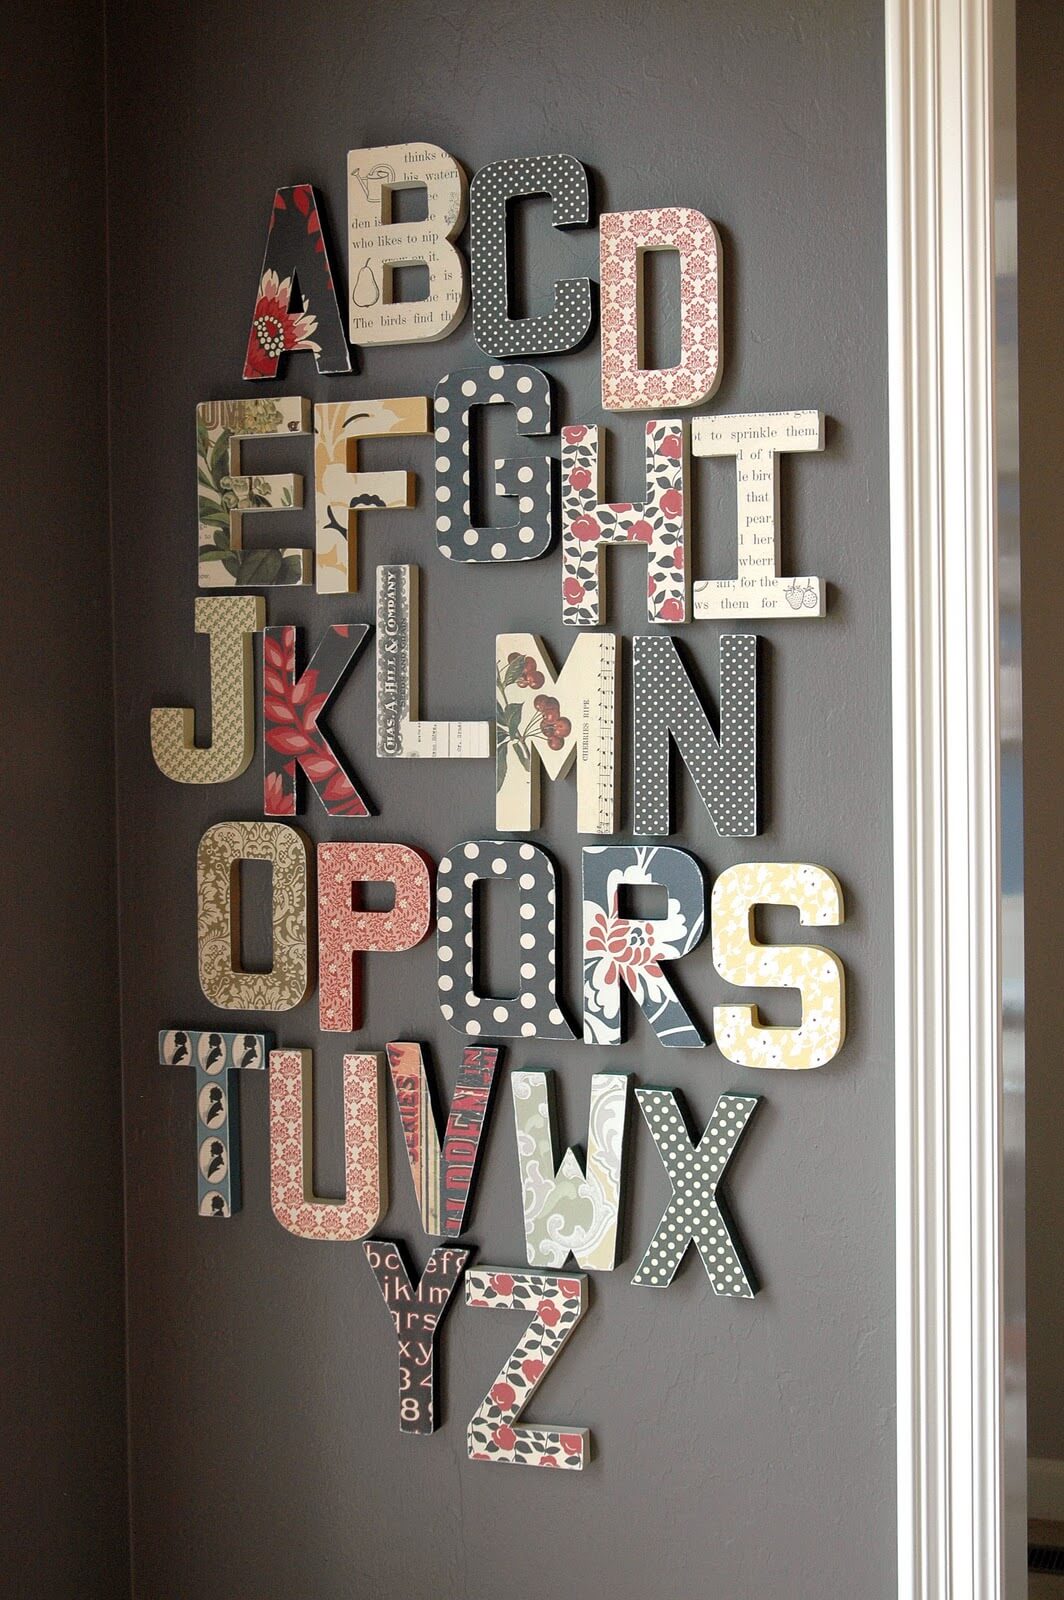 Alphabet Wall Art in Complementary Designs